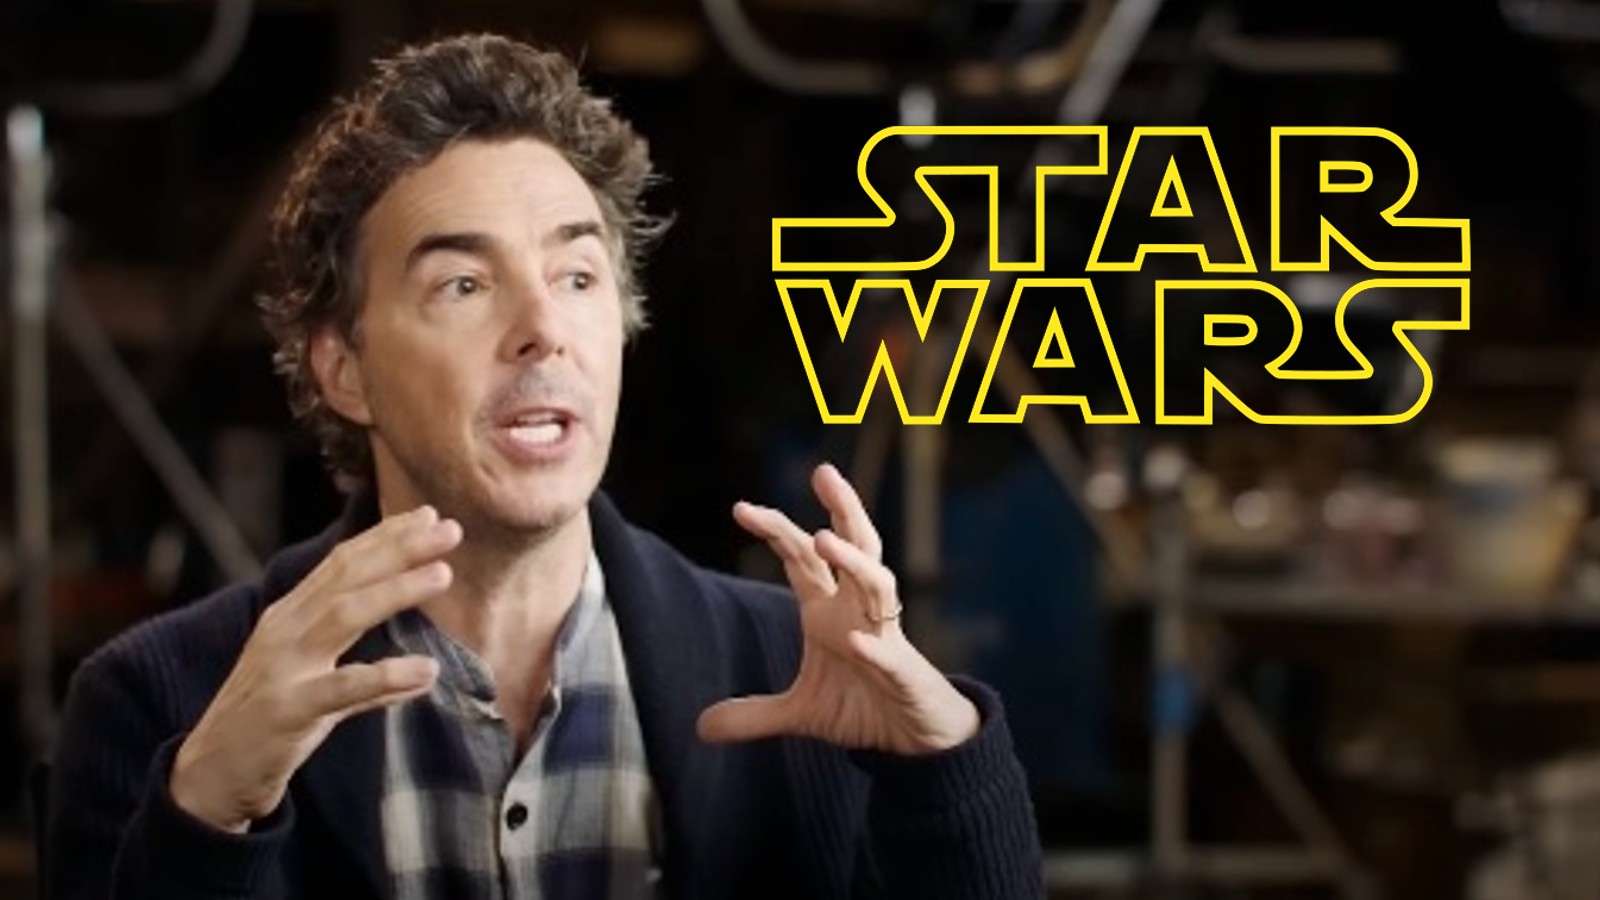 Shawn Levy and the Star Wars logo